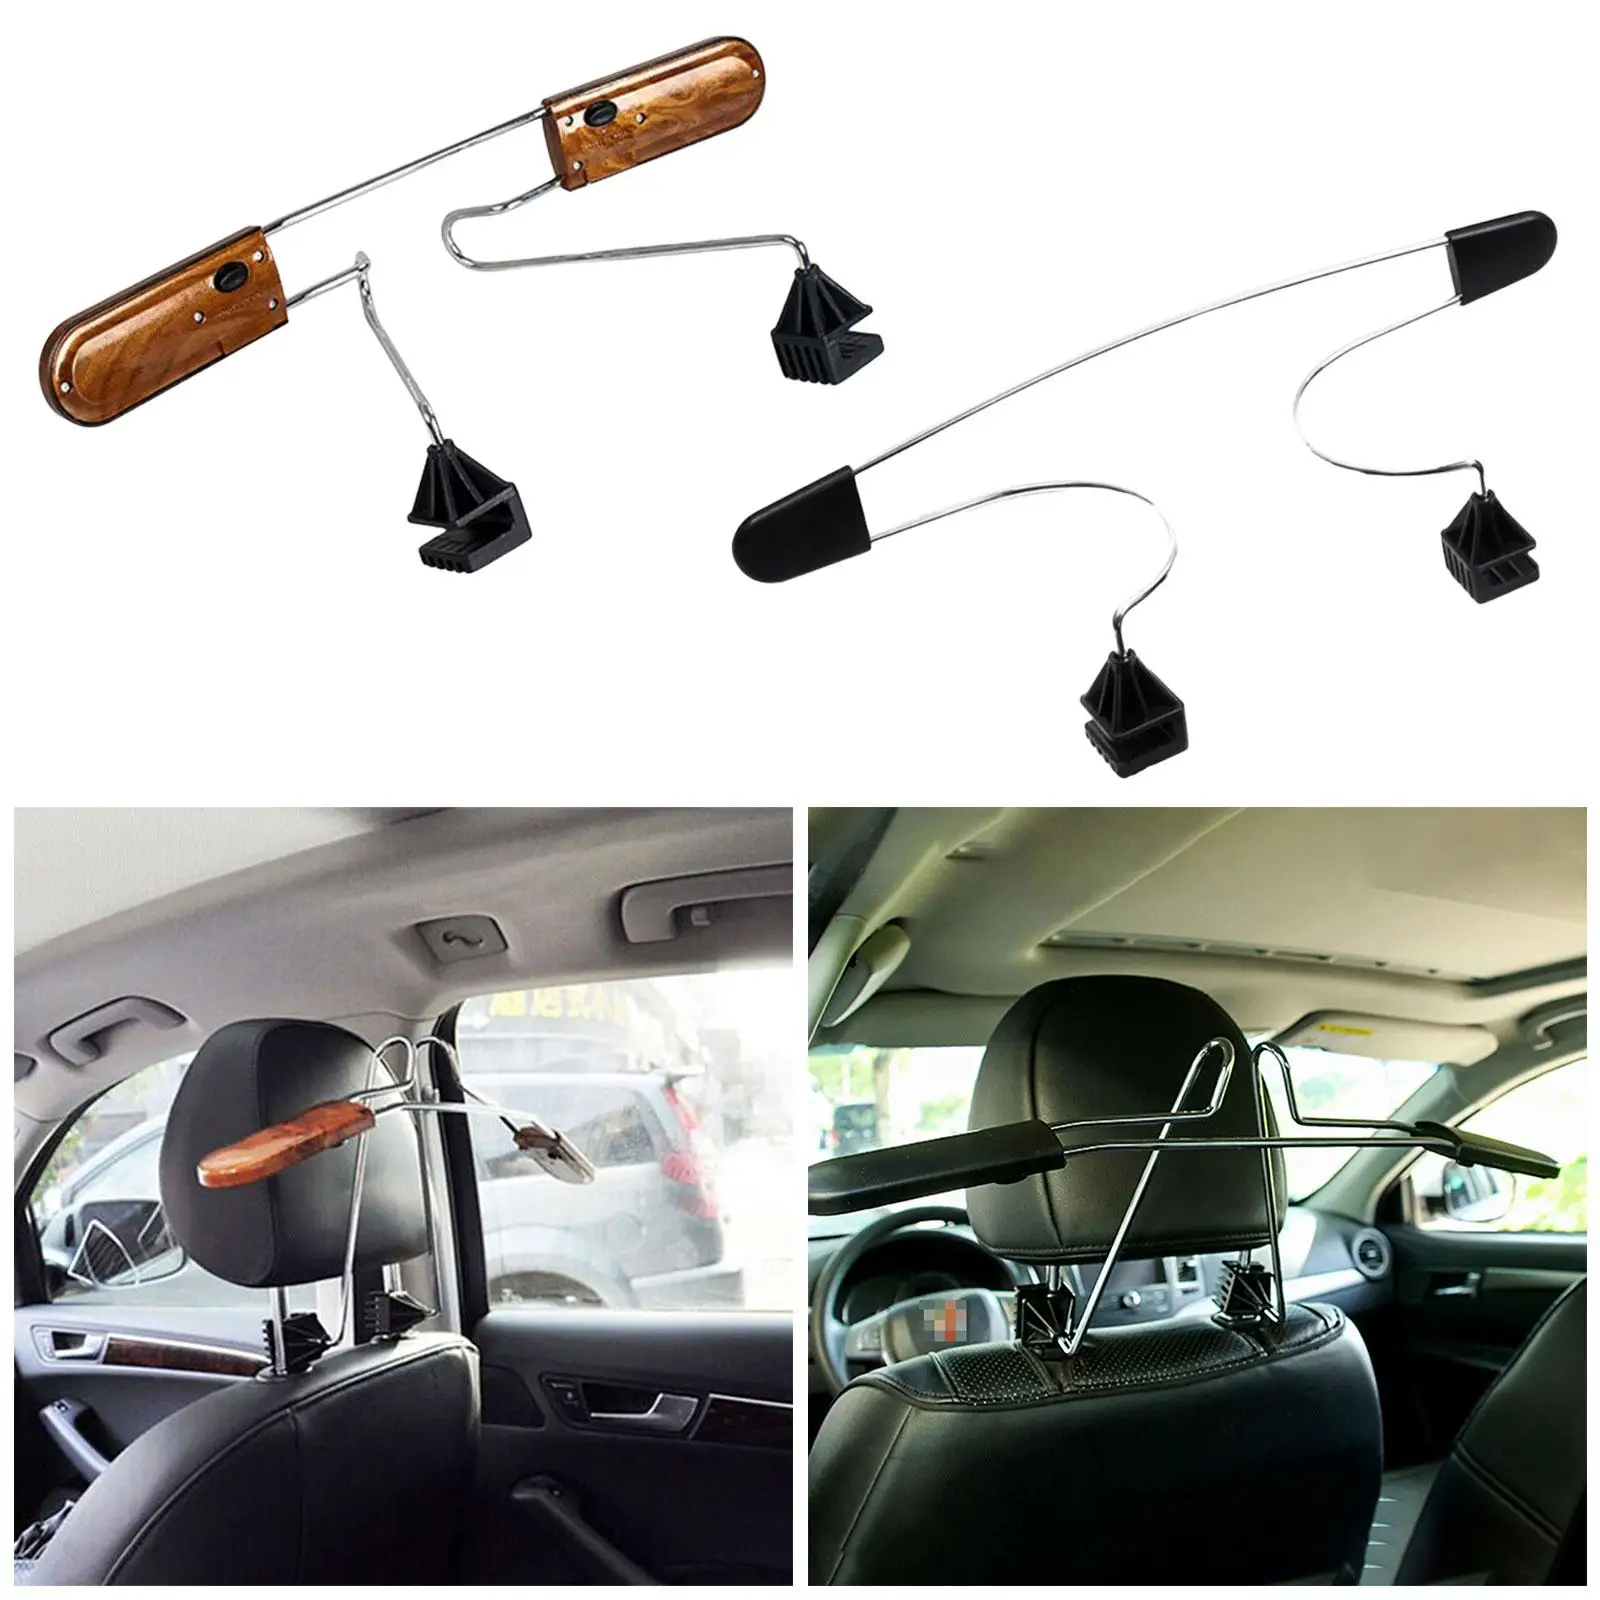 Adjustable Car Hanger Coat Holder ,Keep Clothes Neat and Clean for Suit Jacket Multifunctional Organizer Premium Easy Install